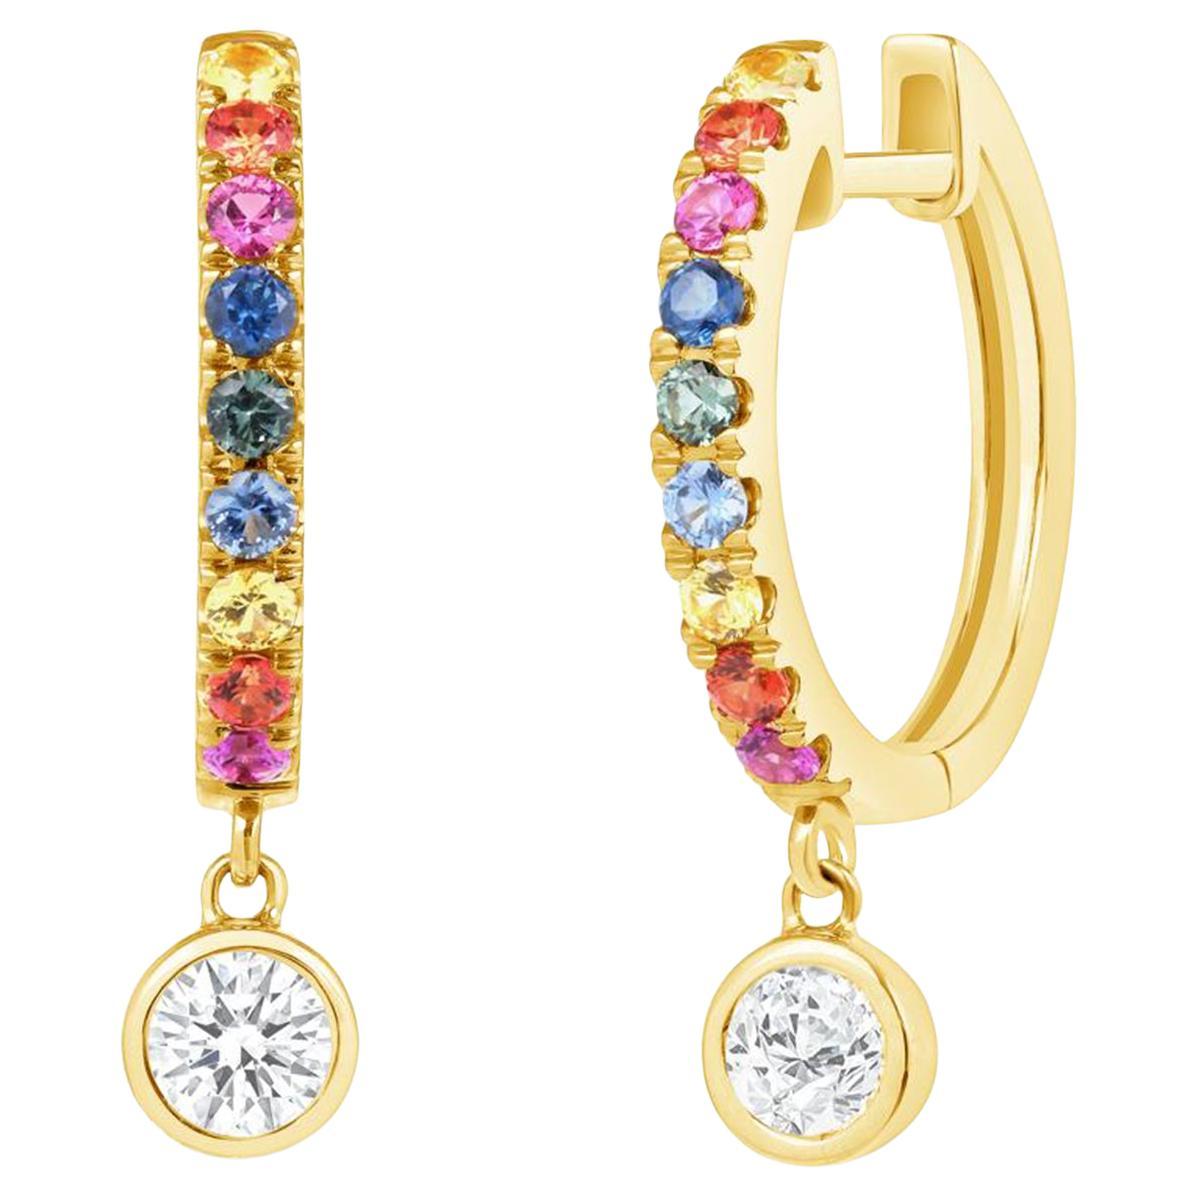 14K Yellow Gold 0.32 CT Multicolor Gemstones and 0.20 CT Diamonds Hoop Earrings For Sale